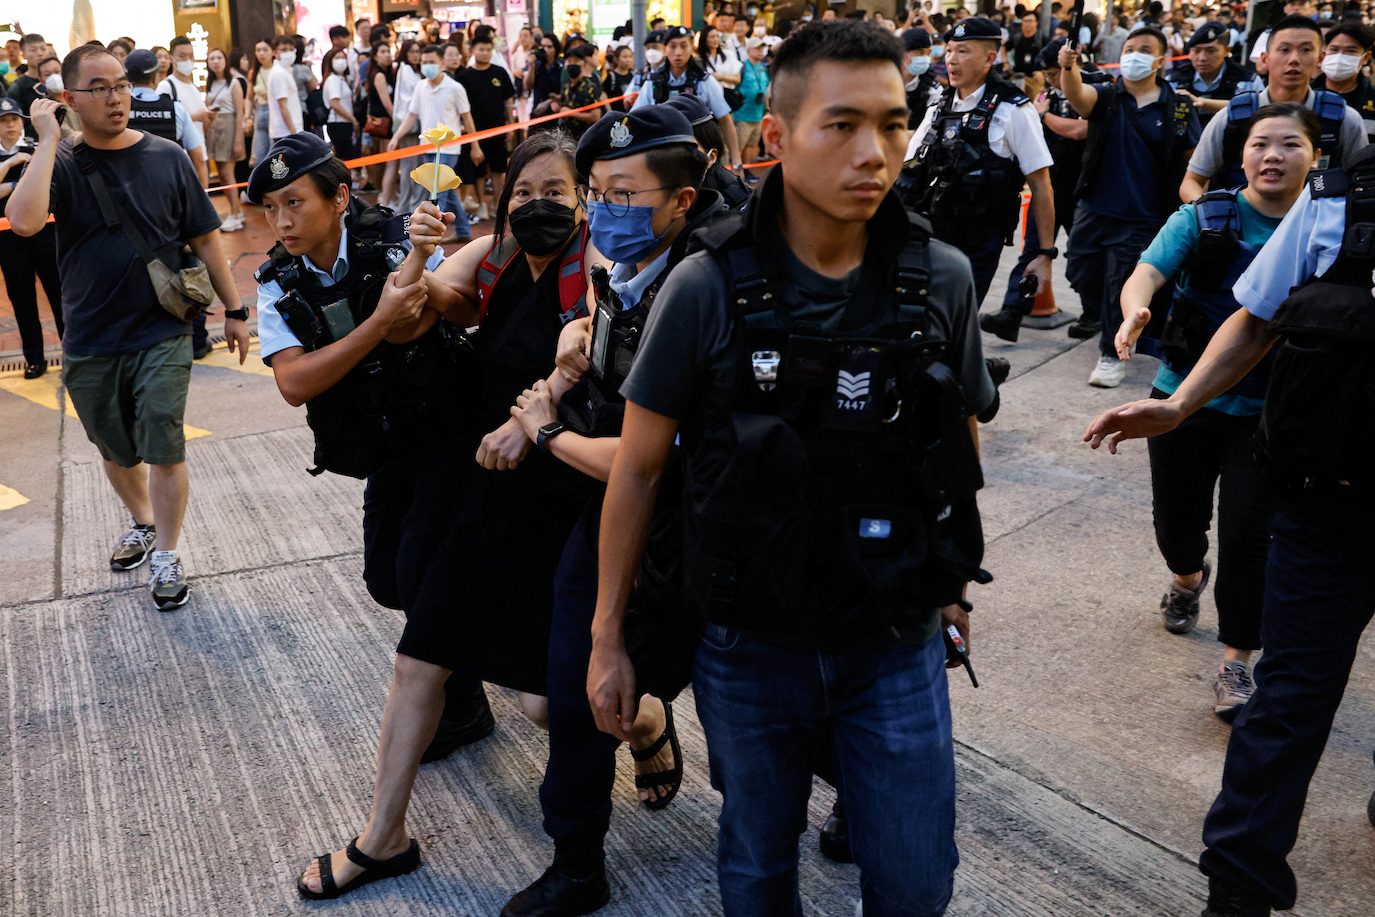 United Nations ‘alarmed’ by Hong Kong June 4 detentions